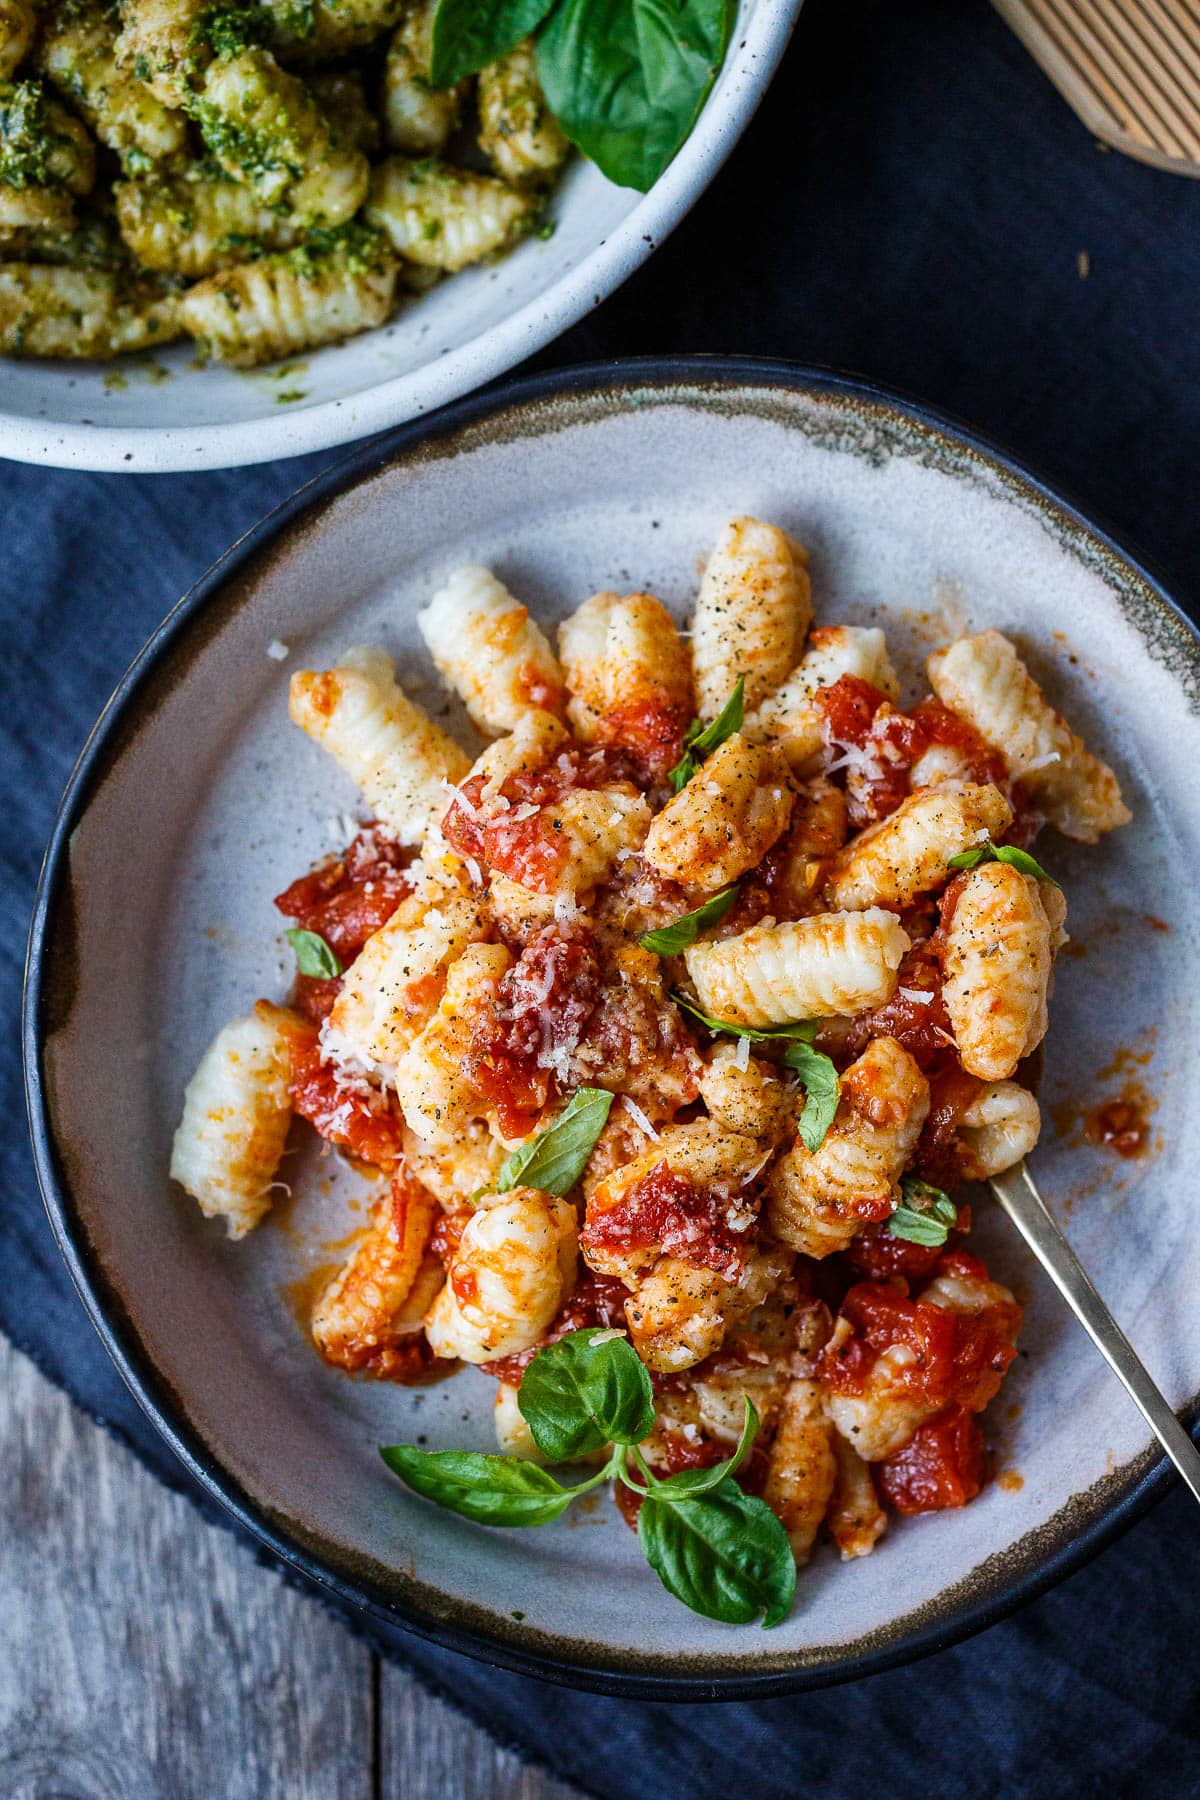 Homemade potato gnocchi! Just four simple ingredients result in the dreamiest little dumplings.  They are actually easier to make then you may think and so much more delicious than store-bought. From baked and sautéed to boiled you'll find so many ways to use them! 